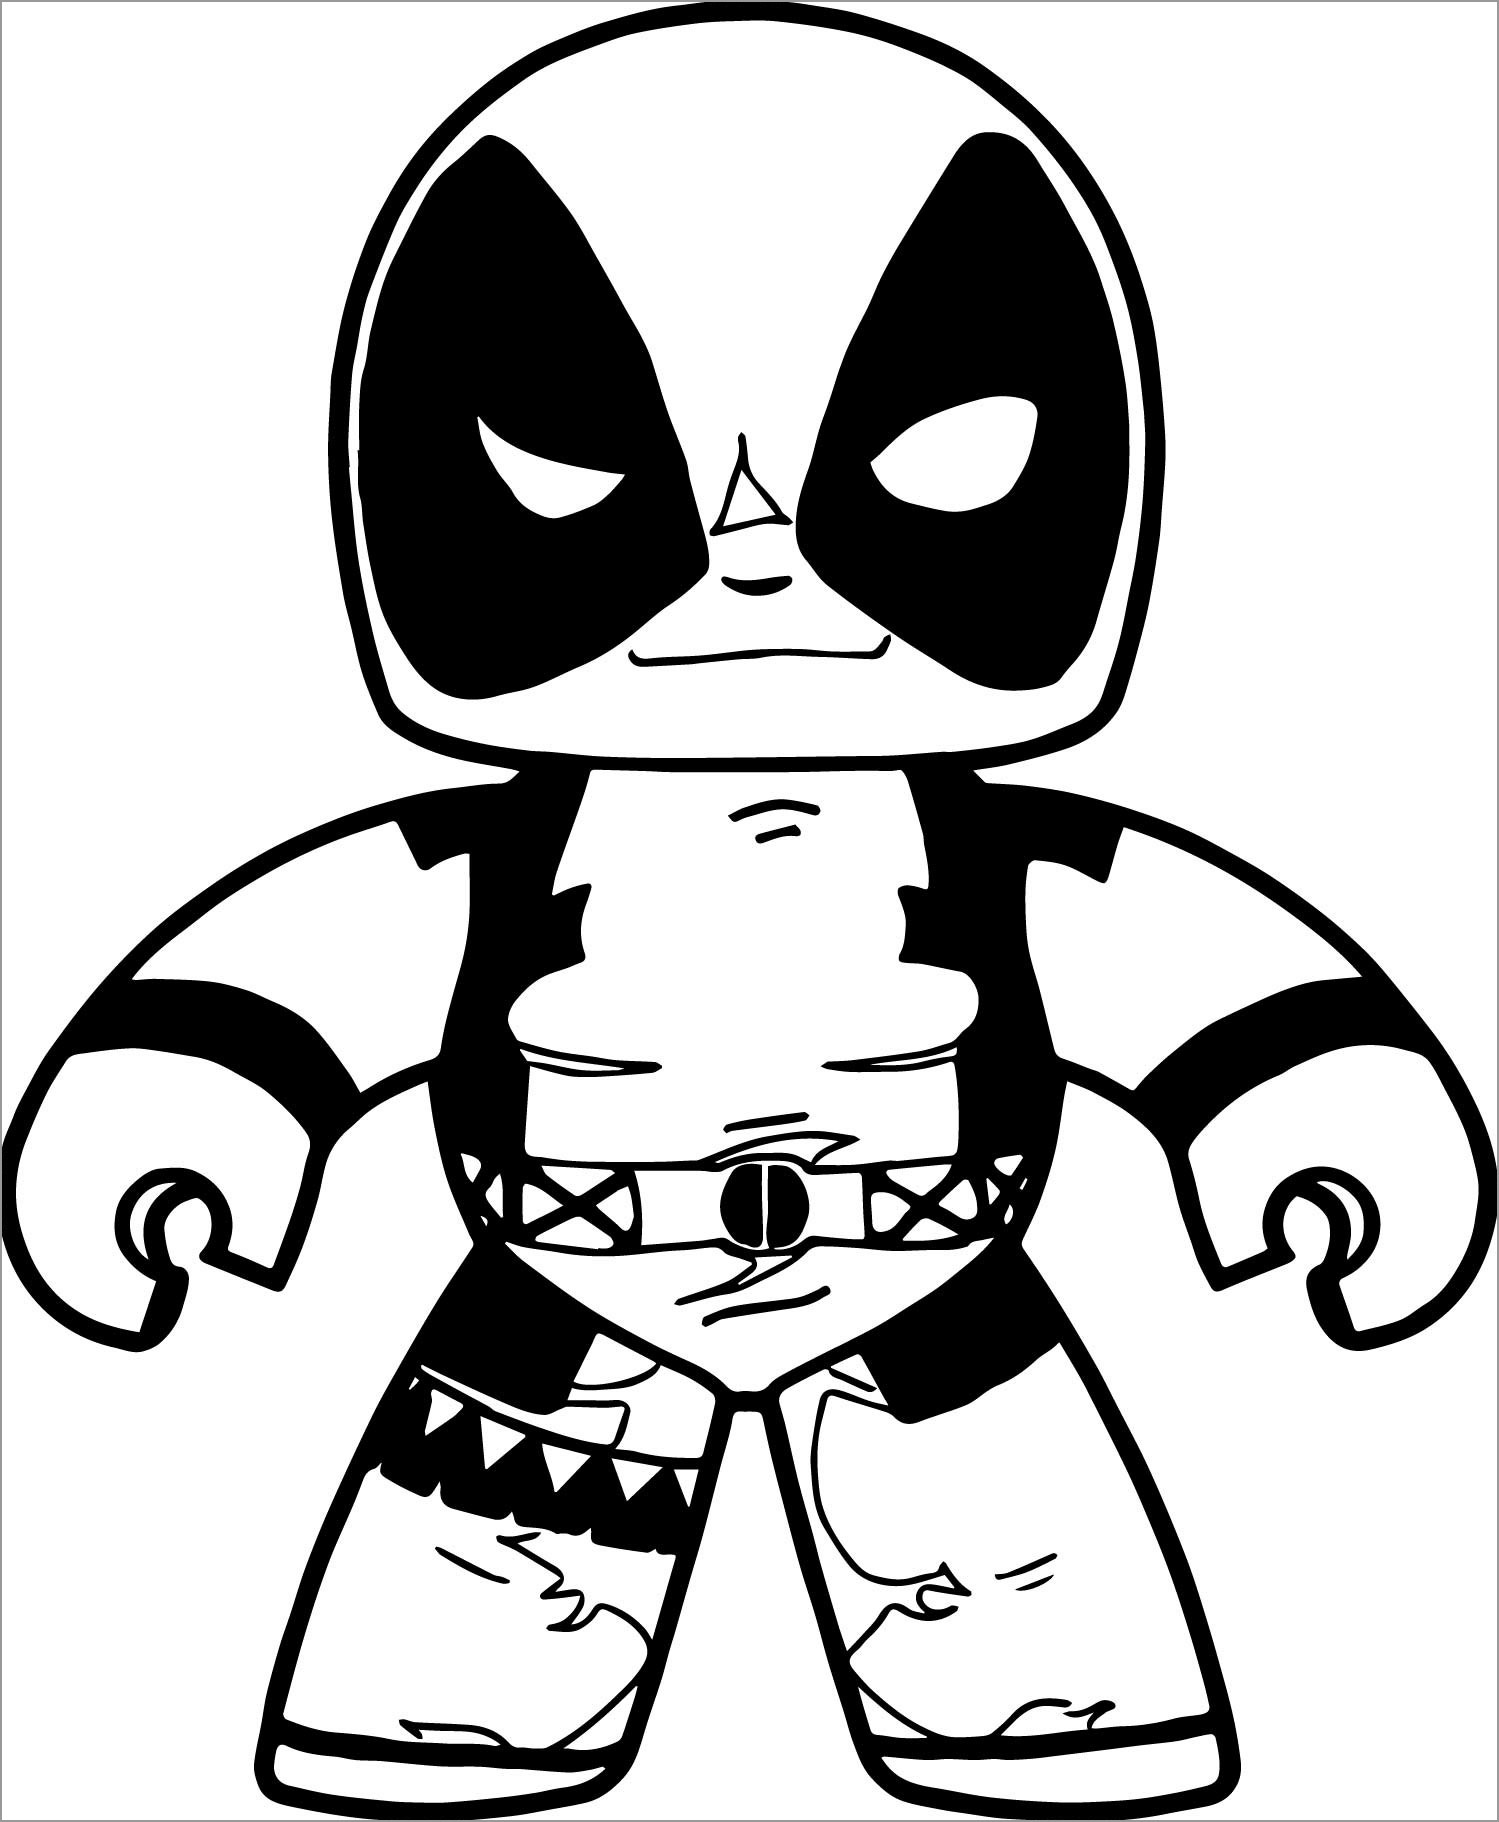 Chibi Deadpool Coloring Page